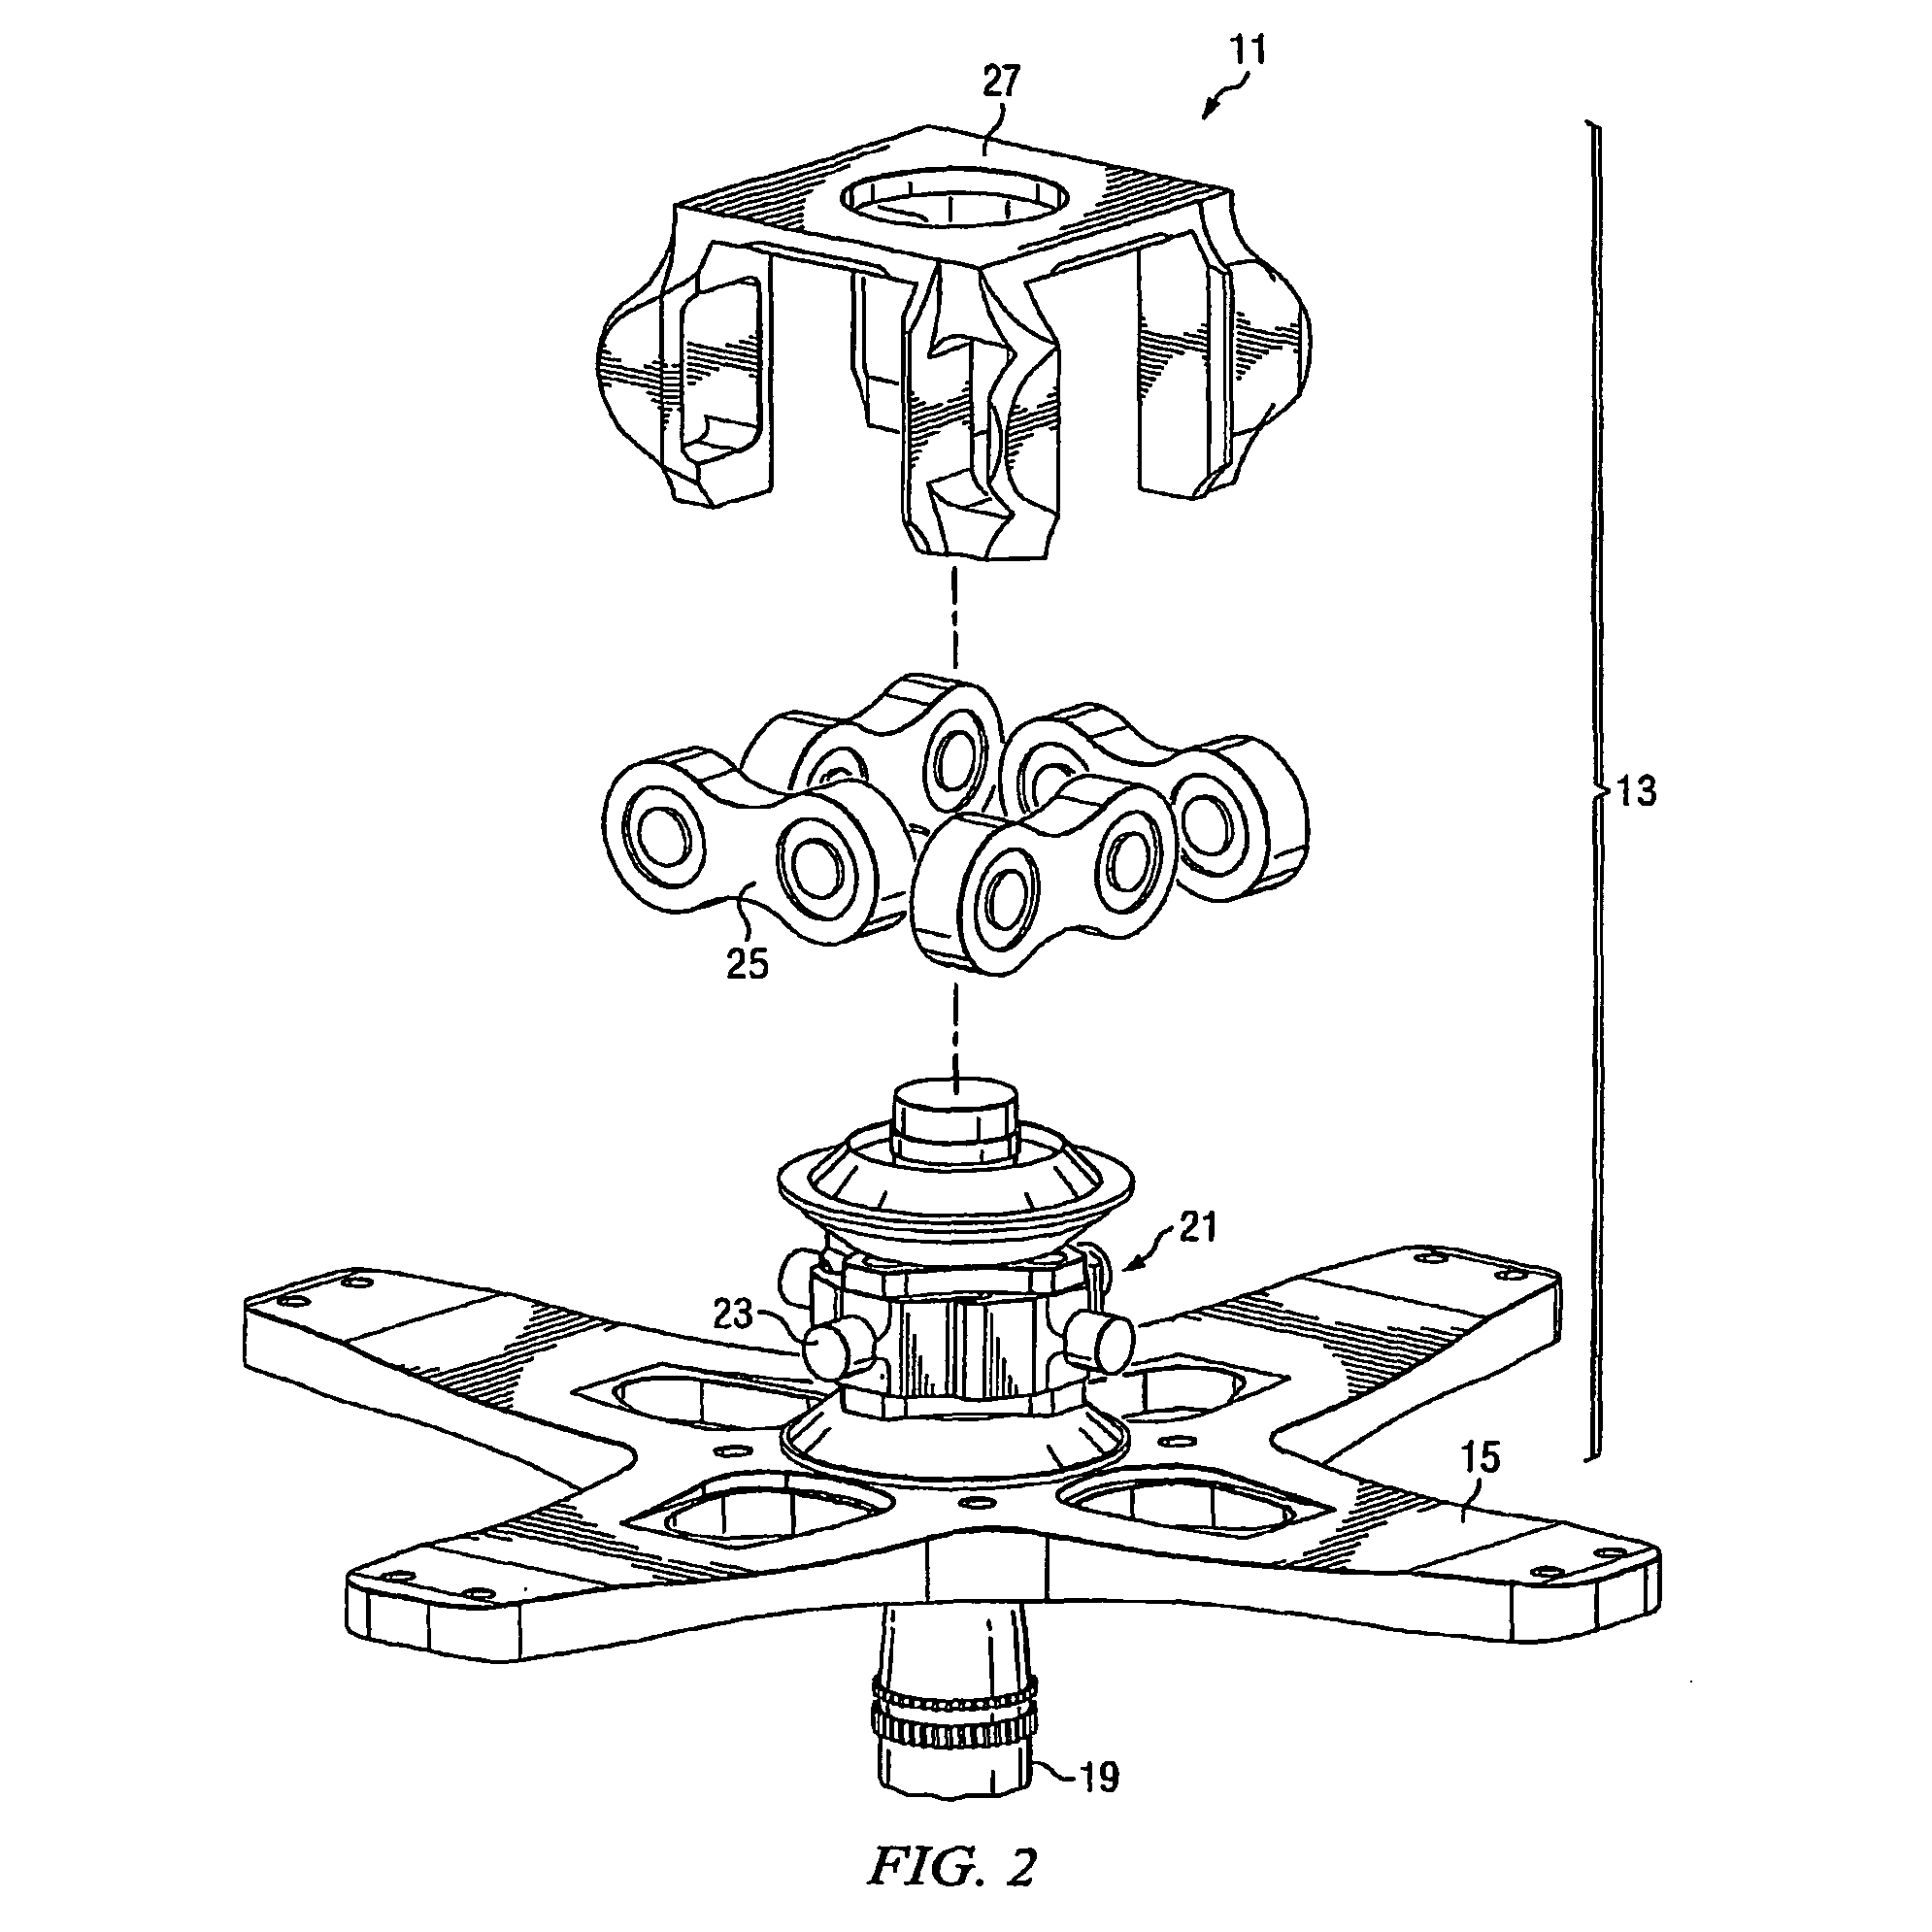 Torque coupling for rotary-wing aircraft